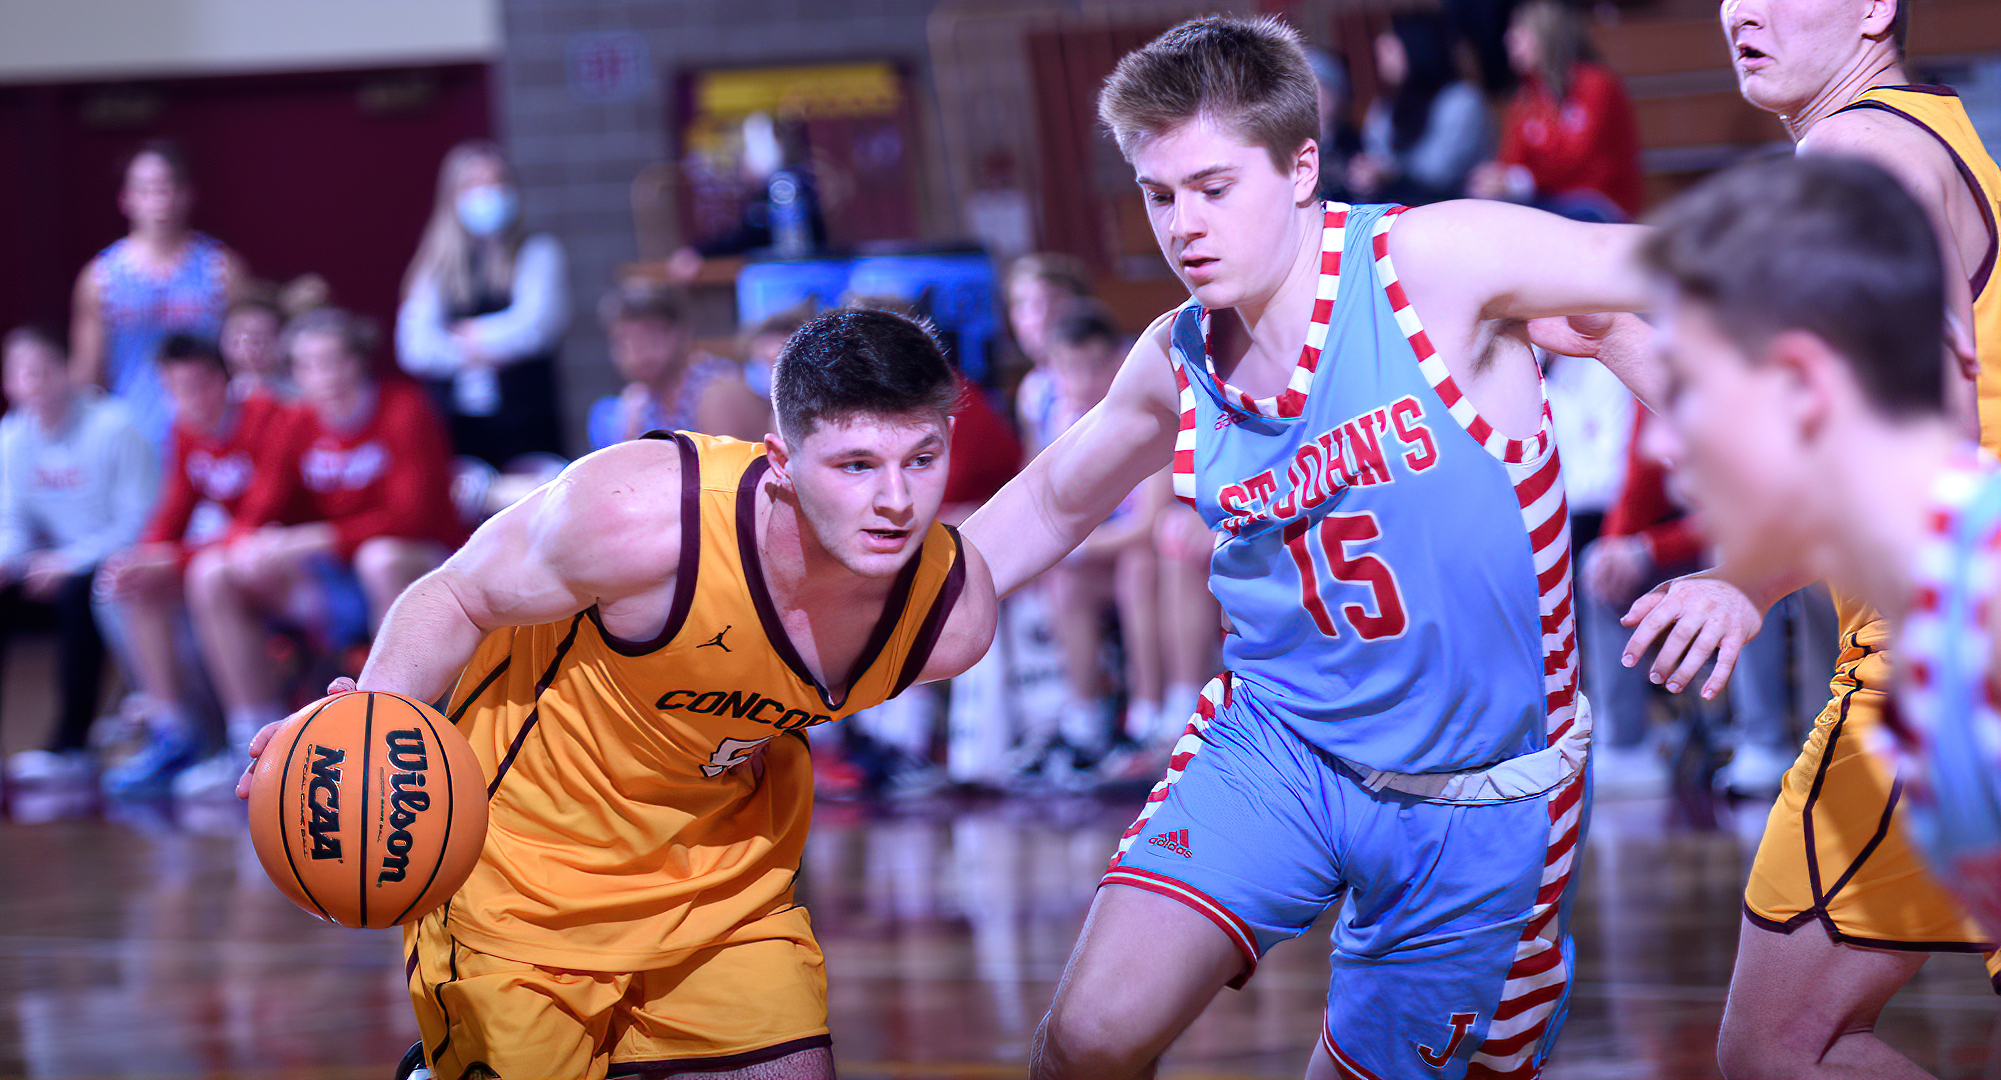 Junior Talon Hoffer drives to the basket during the Cobbers' game with St. John's. Hoffer went 4-for-5 from the floor and finished with 13 points.